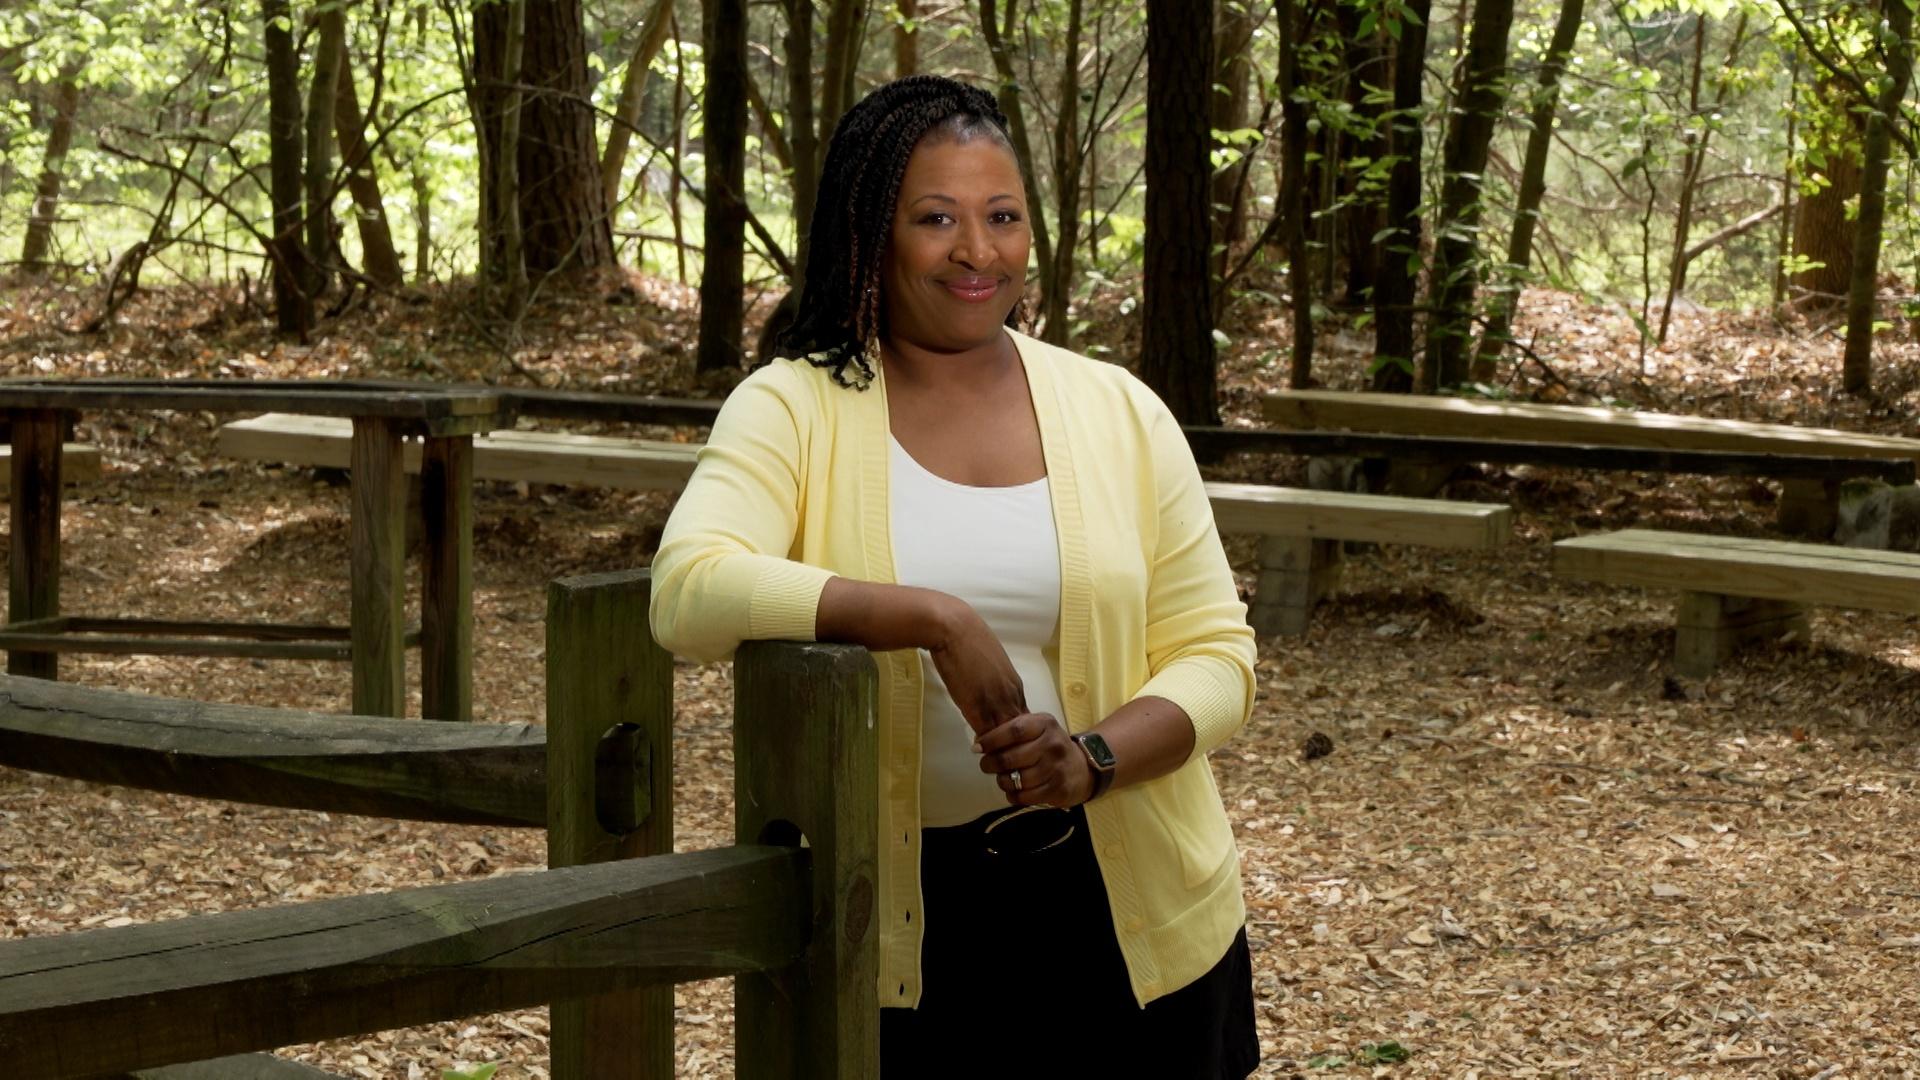 Deborah Holt Noel, host of NC Weekend, leans up against a wooden fence in the forest.